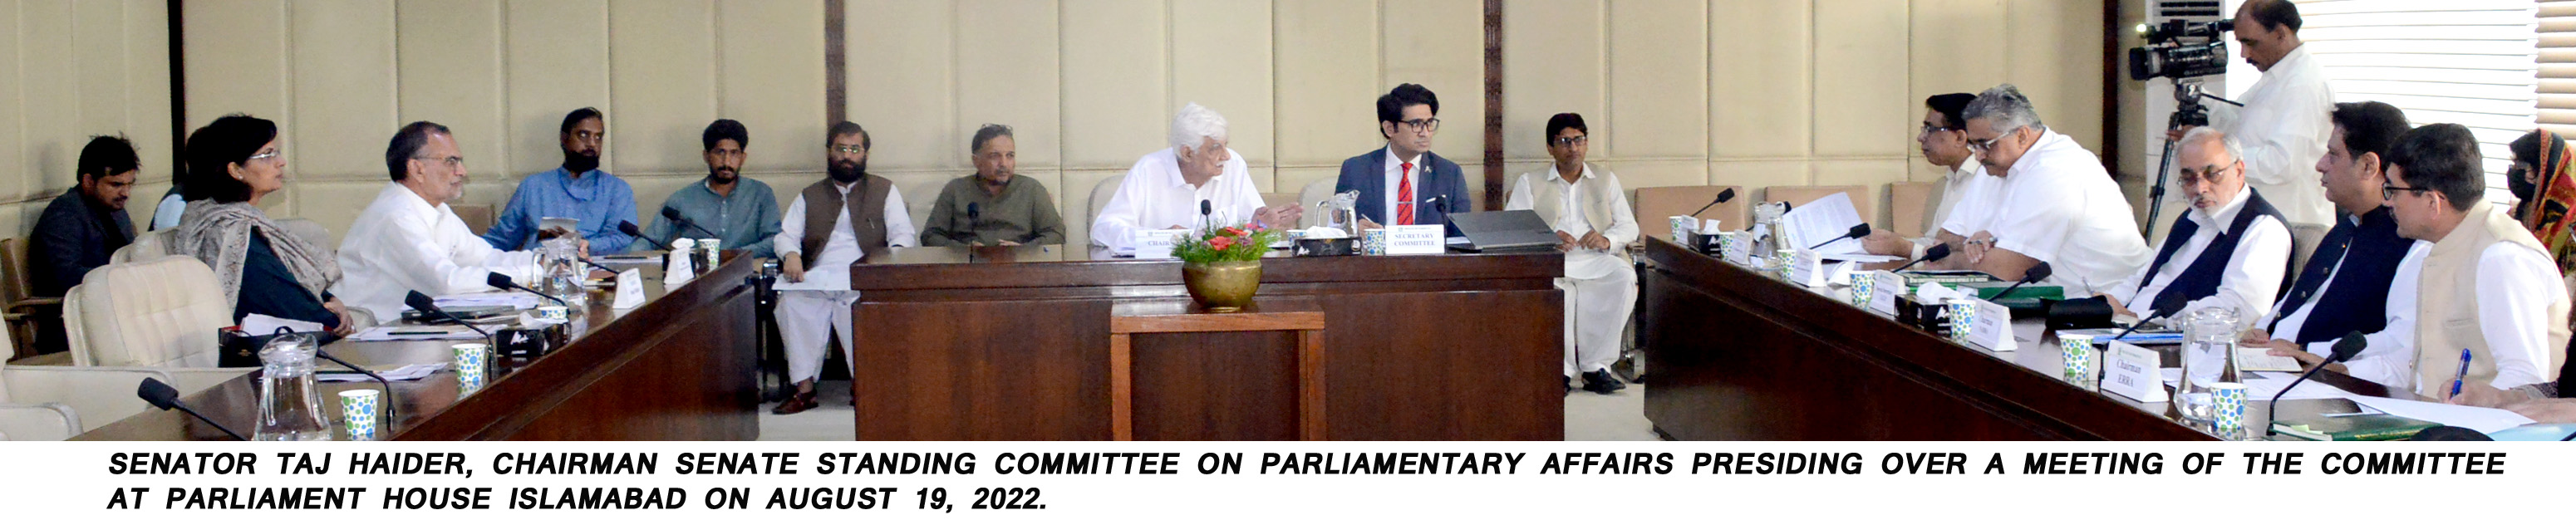 The meeting of the Senate Standing Committee on Parliamentary Affairs was held today at the Parliament House under the chairmanship of Senator Taj Haider.